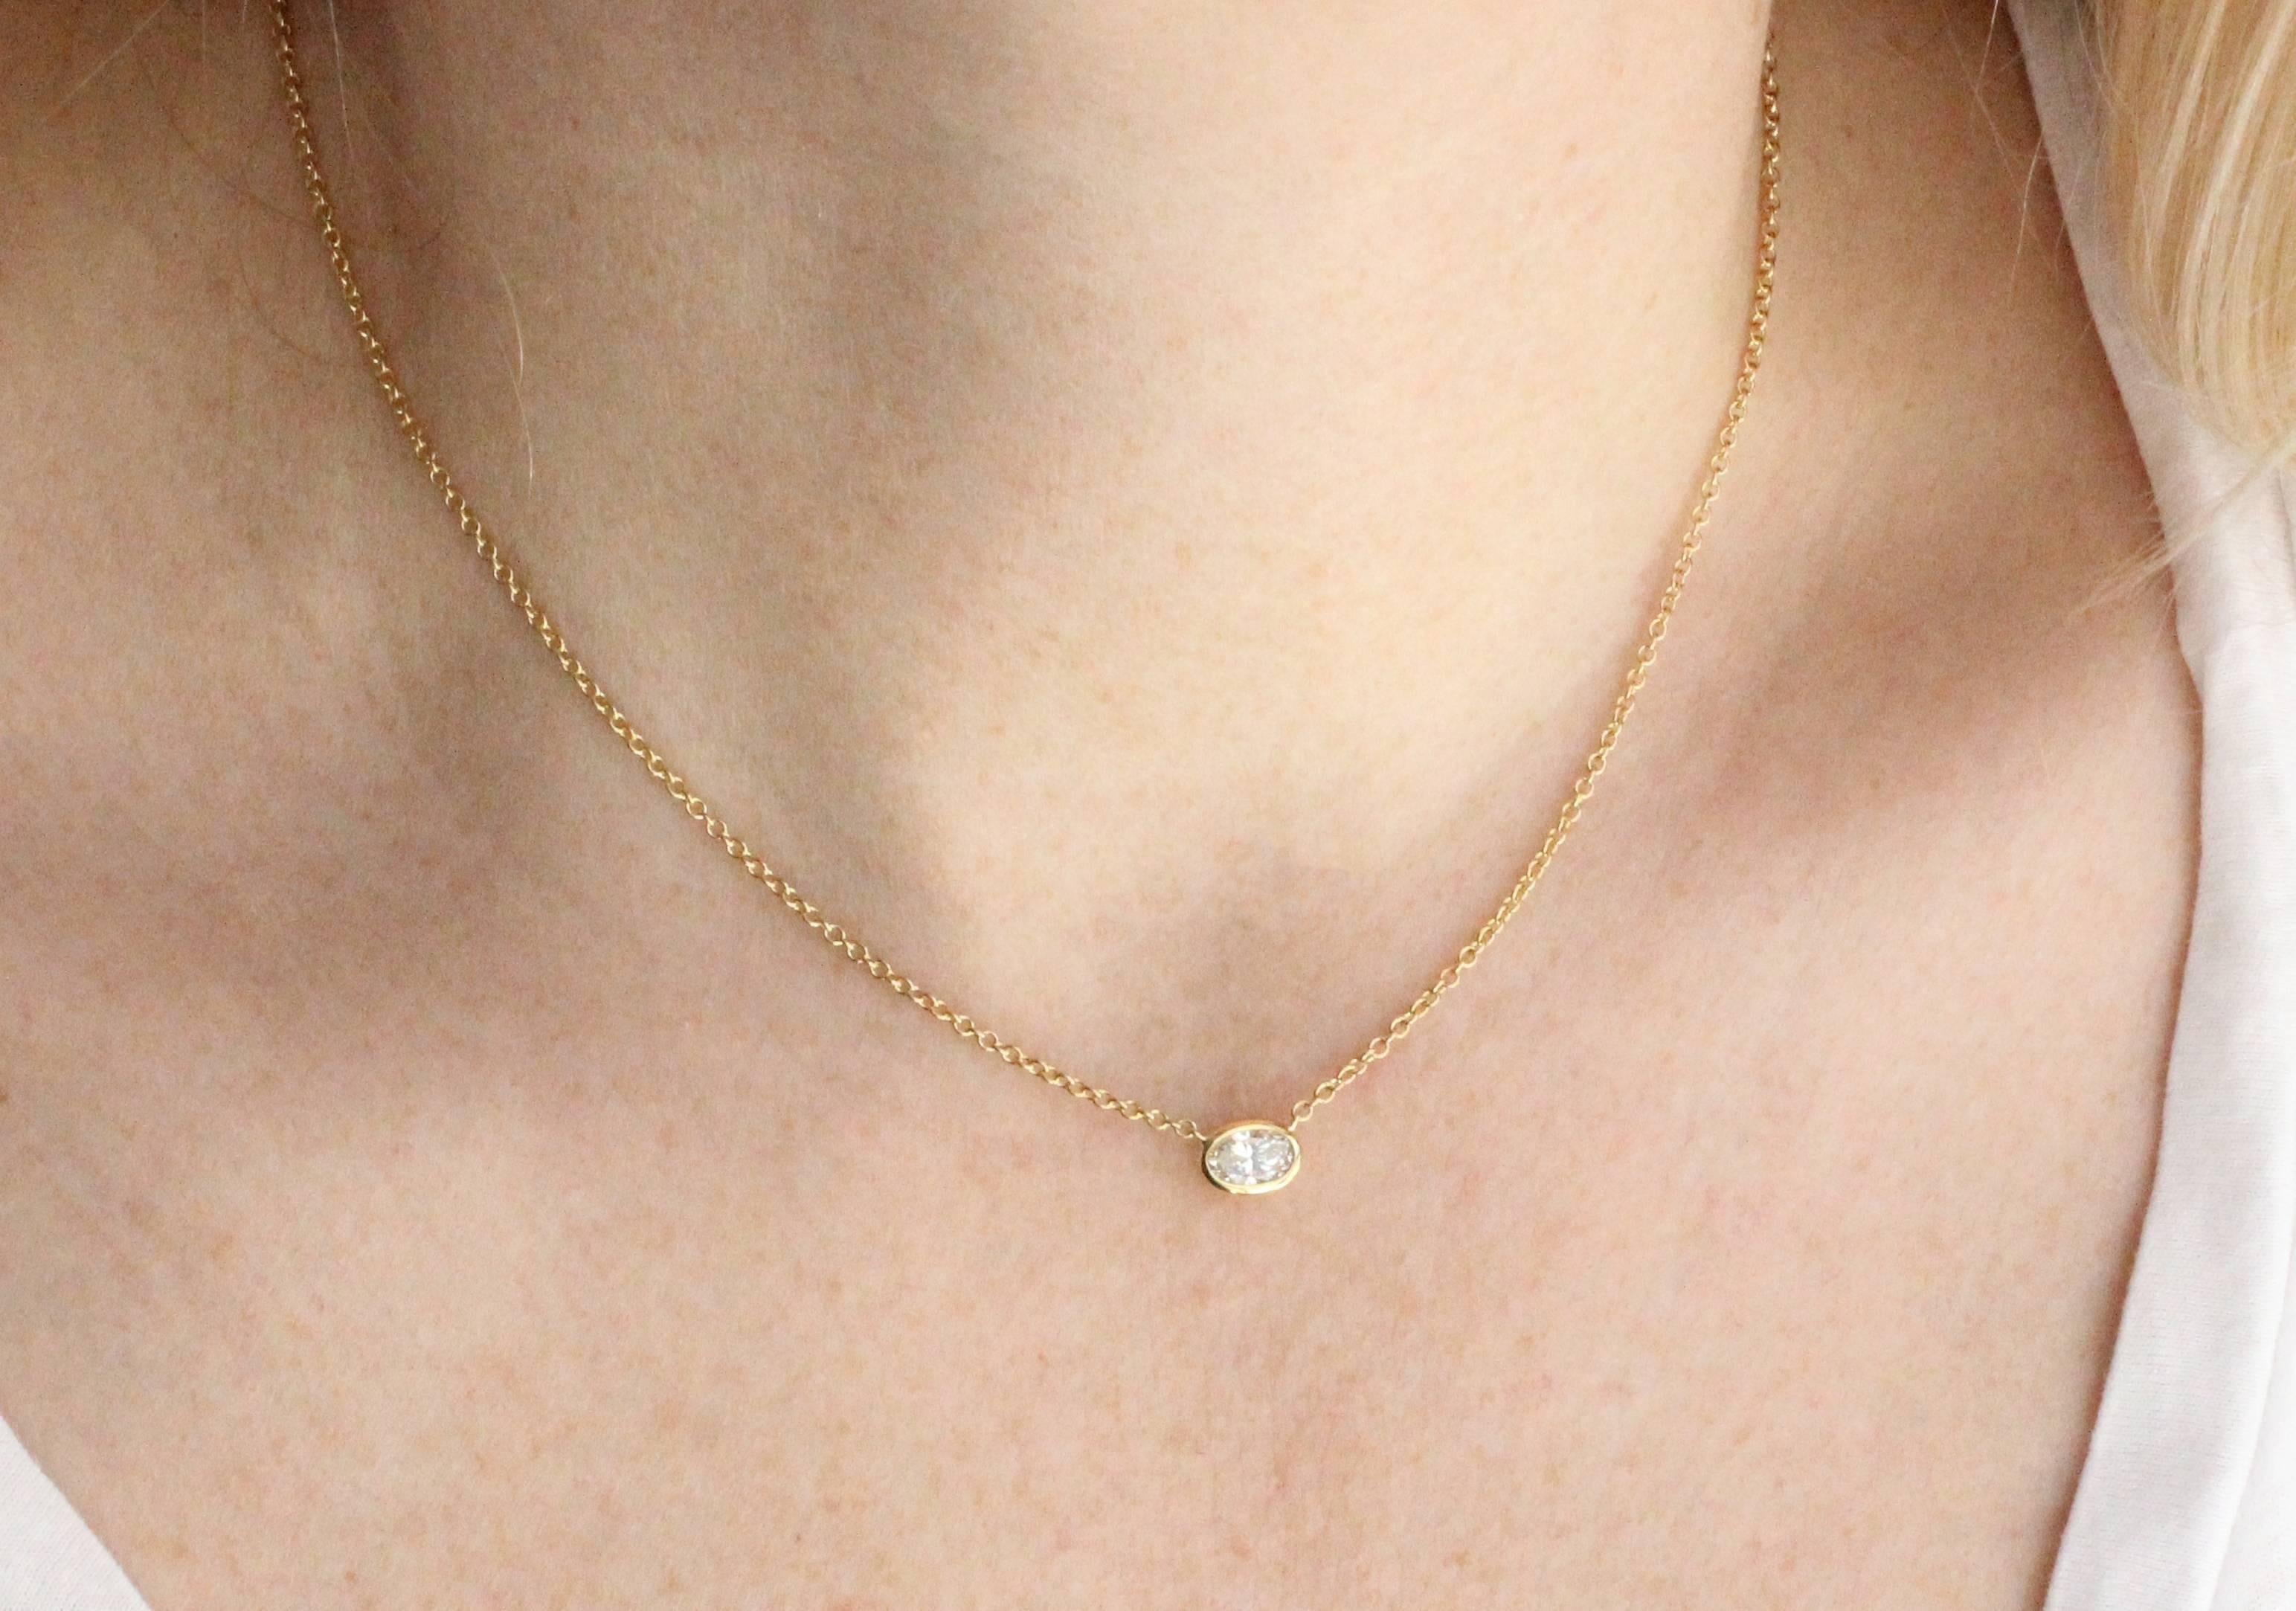 Great everyday diamond necklace features a .60 Cts. Oval Diamond.  The versatile 18 KT Gold chain can be worn at 15